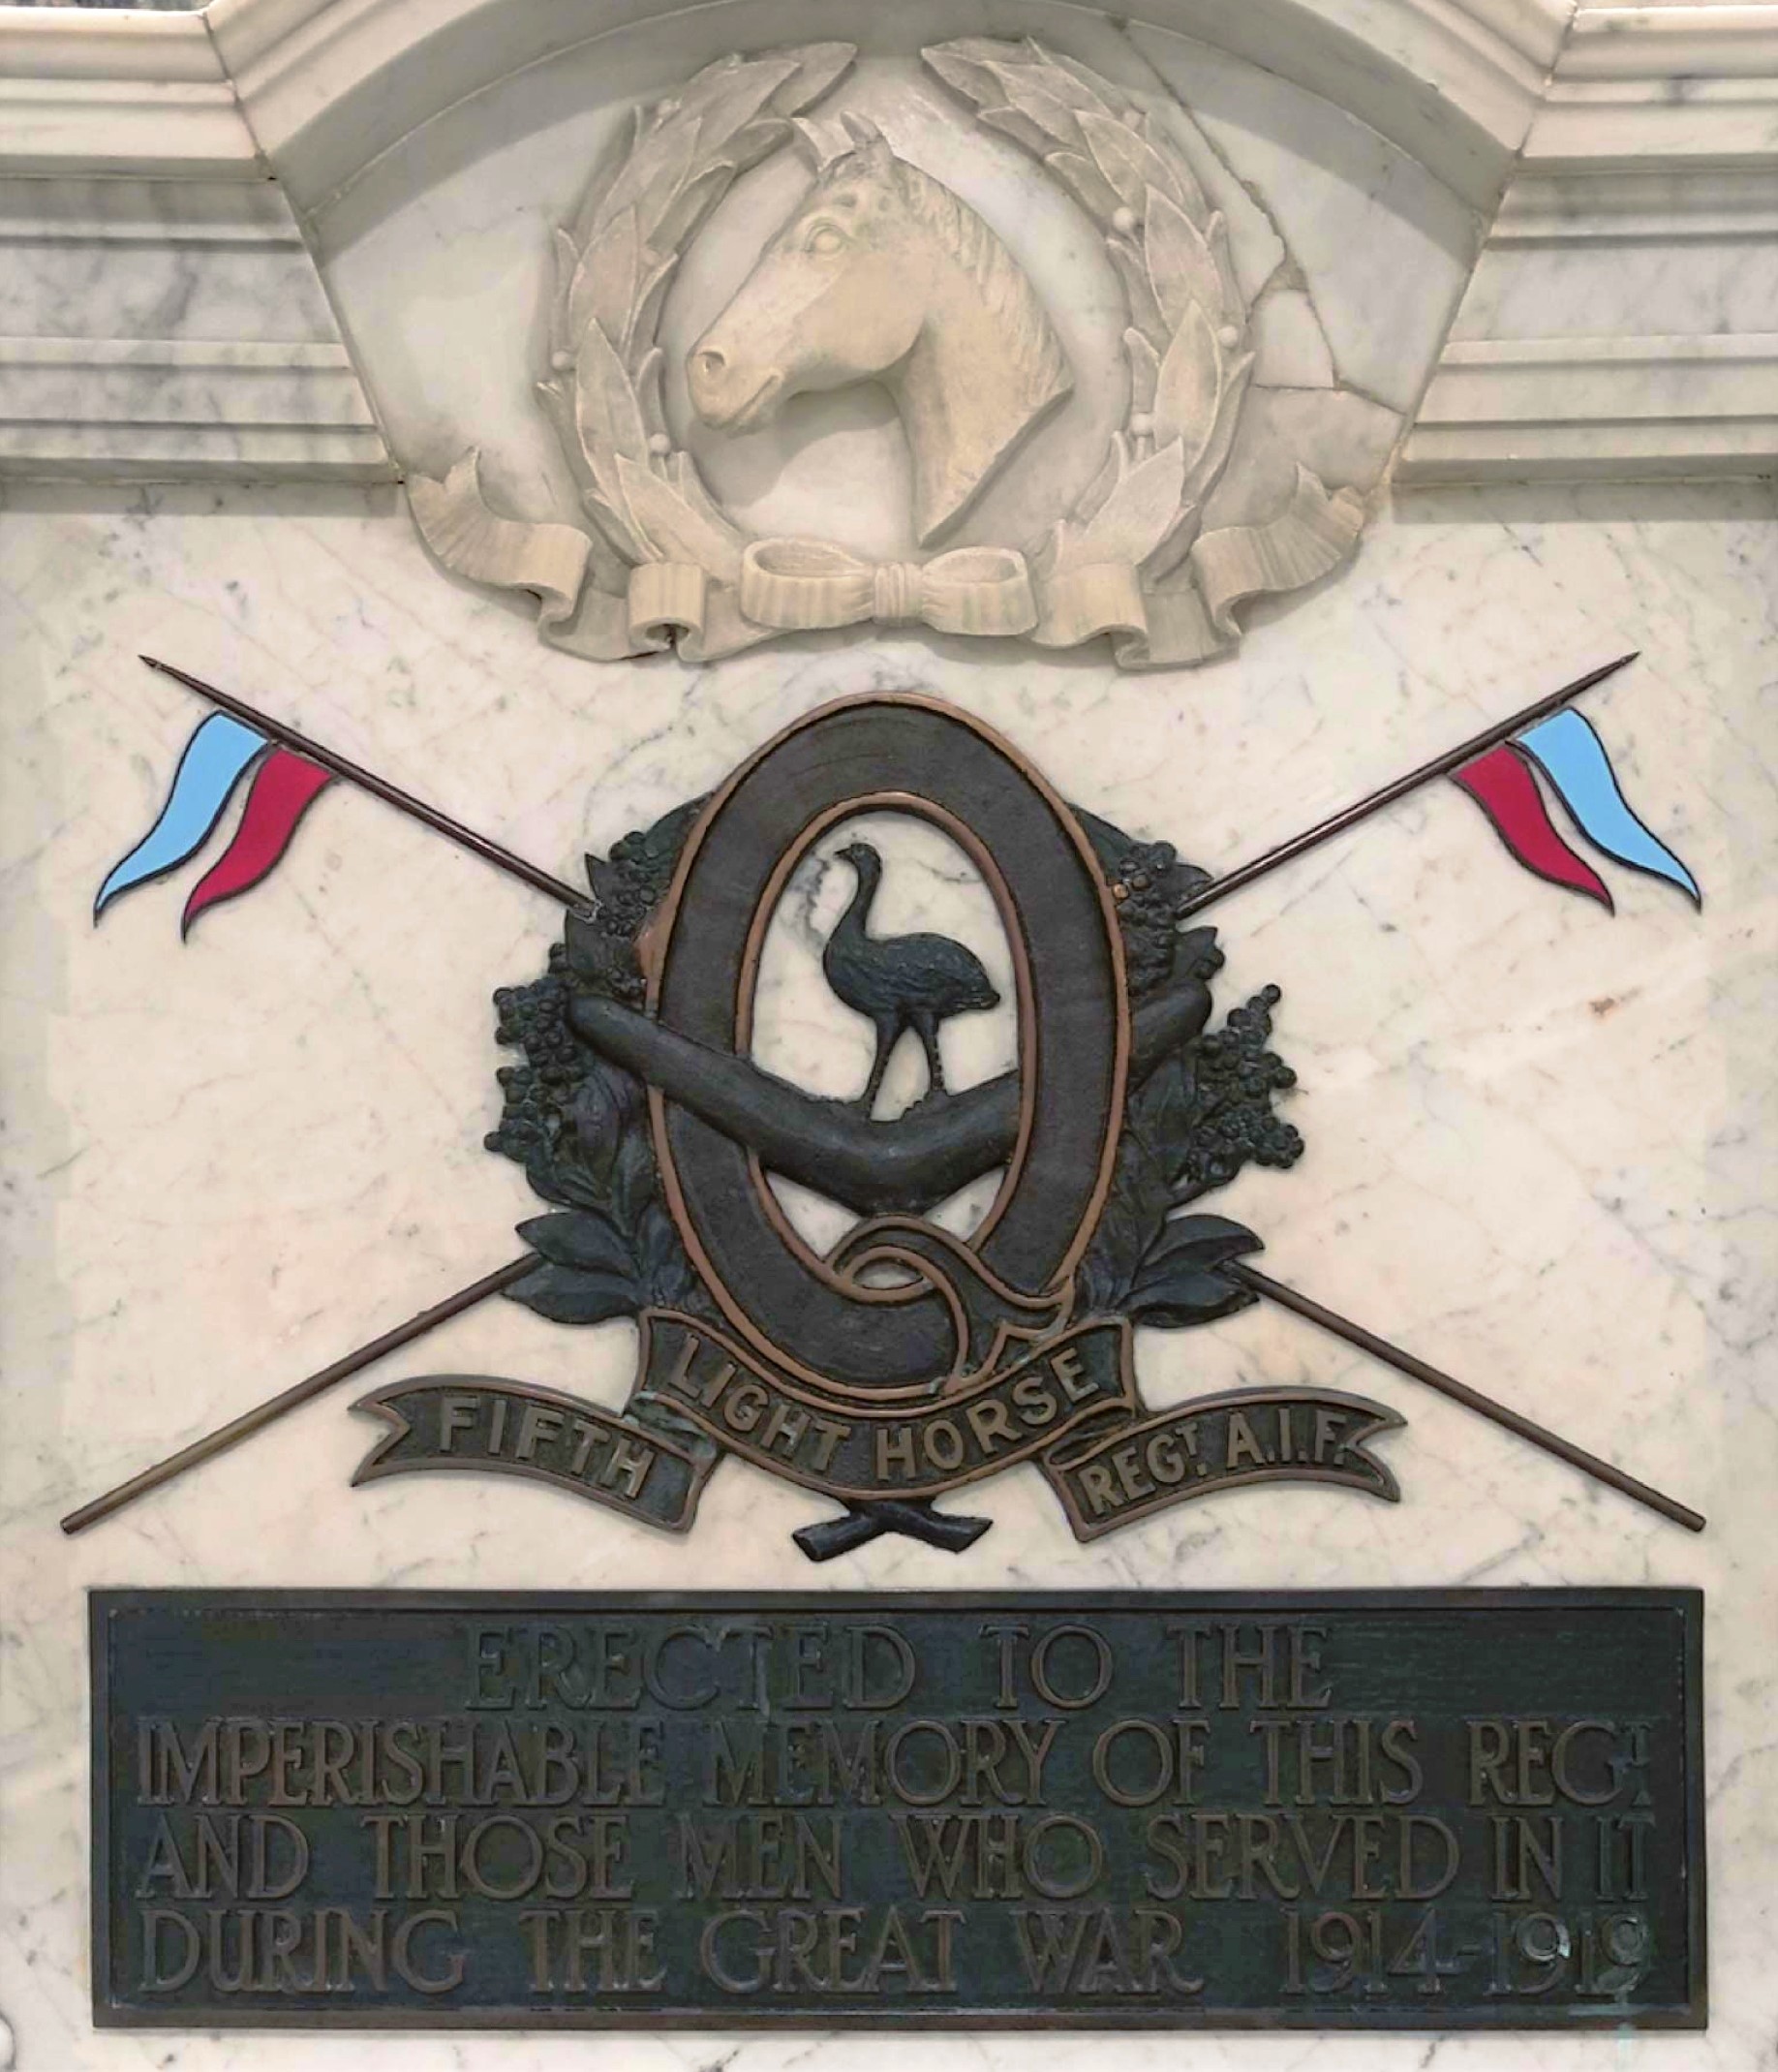 Dark brown plaque of letter Q surrounded by wattle wreath, with emu in centre standing on boomerang, blue and red flags crossing in the background. Words below and white horse head in wreath above.